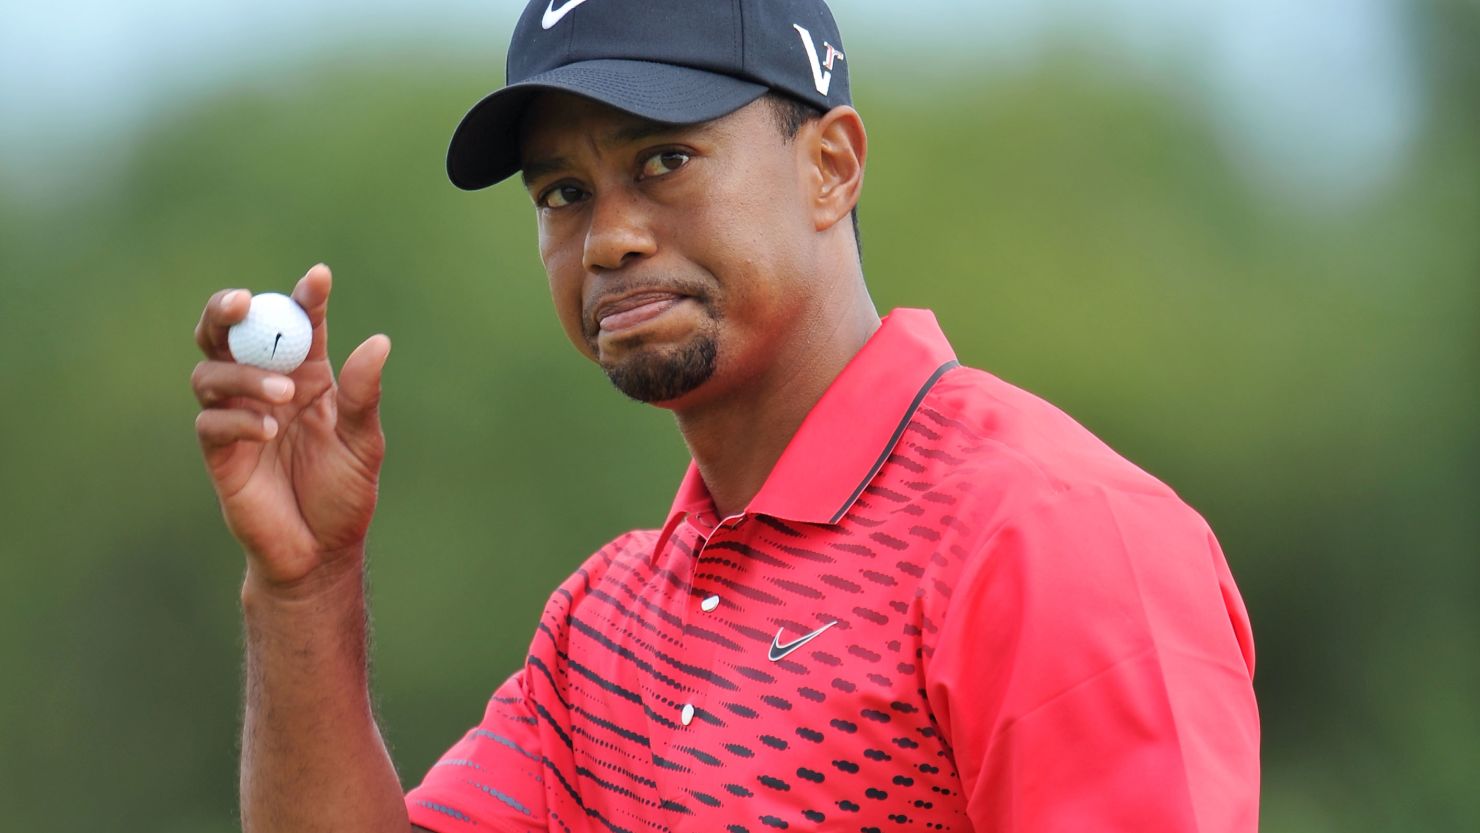 American golfer Tiger Woods moved up to second in the world rankings with his third-place finish at the British Open last month.